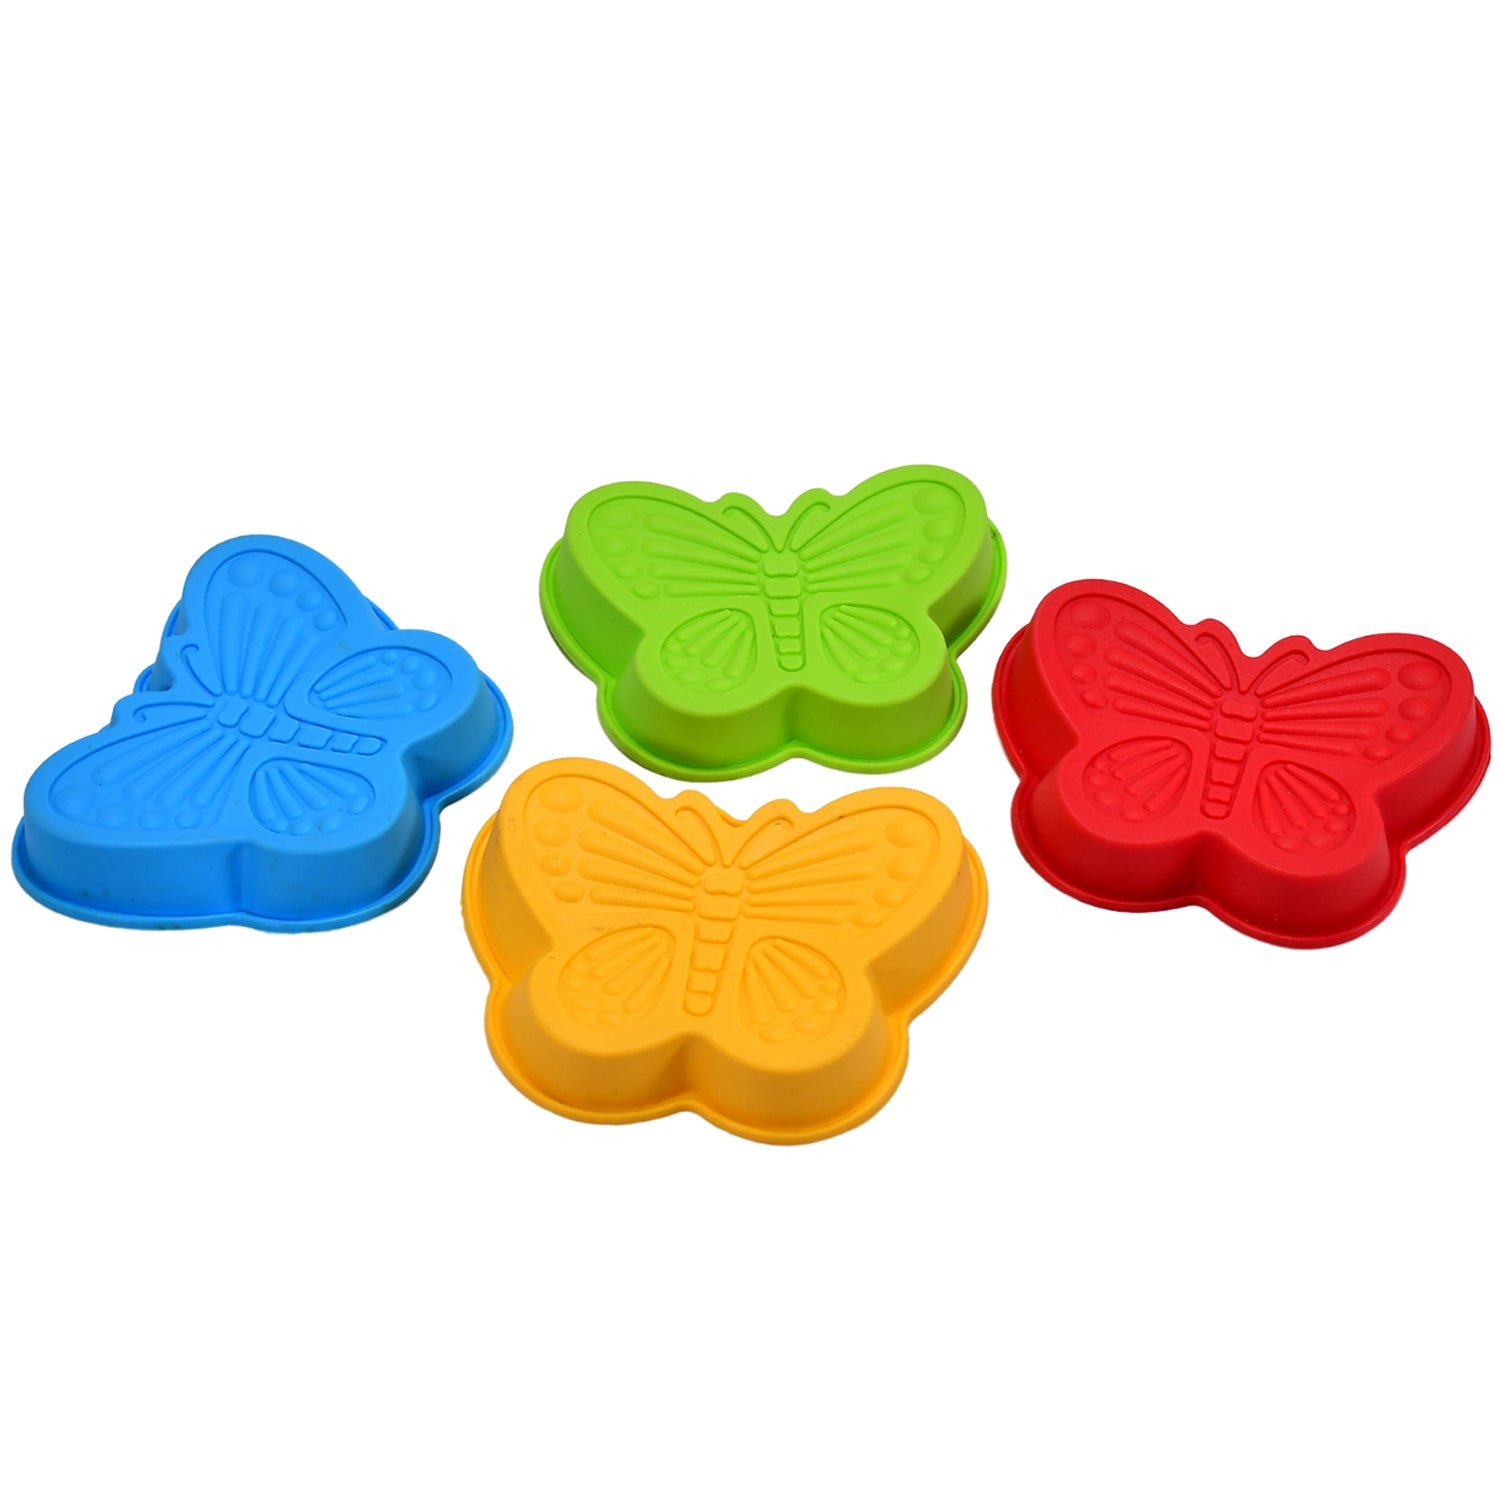 2679 Butterfly Shape Cake Cup Liners I Silicone Baking Cups I Muffin Cupcake Cases I Microwave or Oven Tray Safe I Molds for Handmade Soap, Biscuit, Chocolate, Muffins, Jelly – Pack of 4 